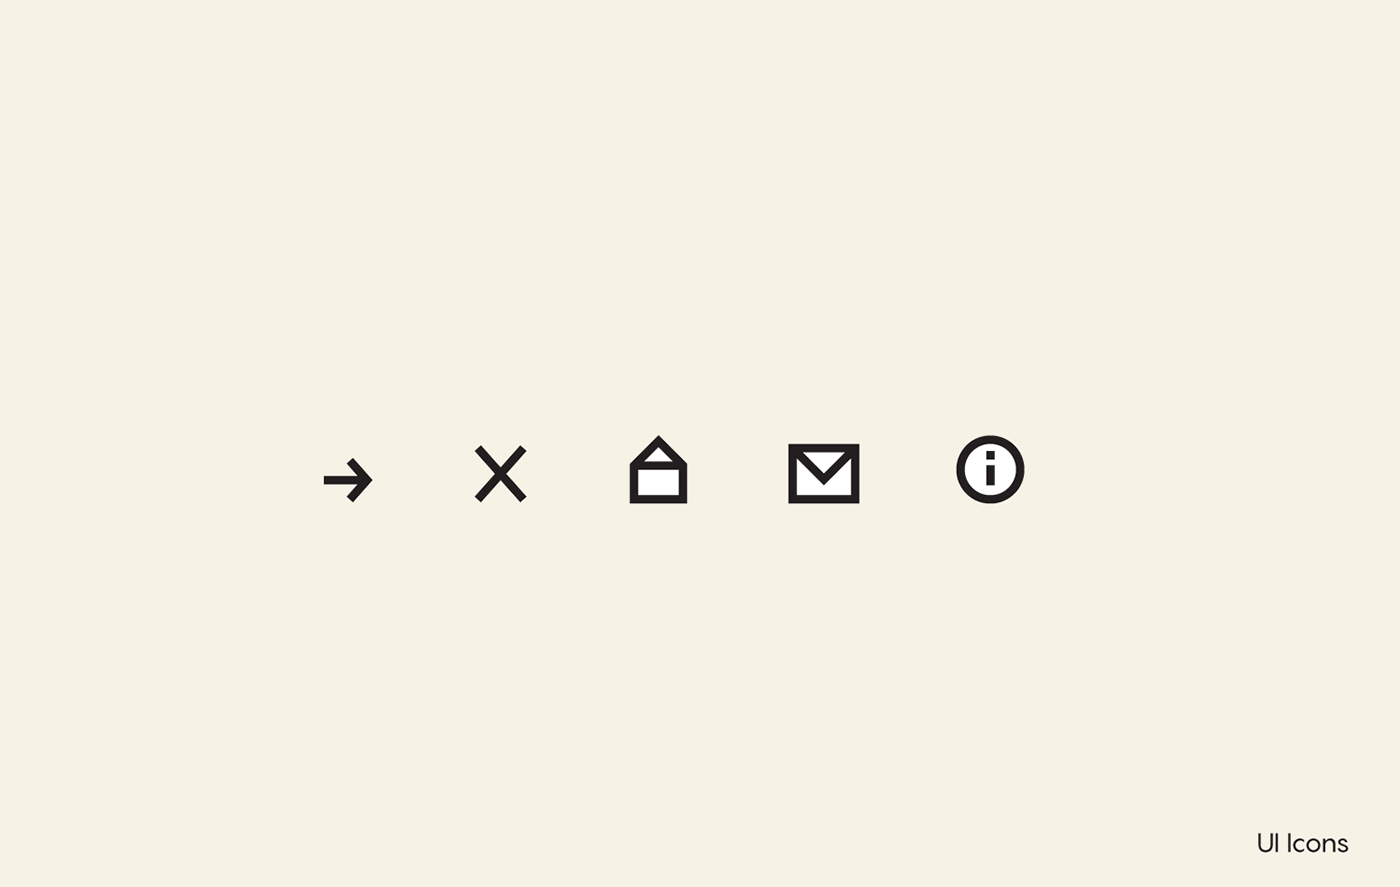 UI icons for Ordinary landing page